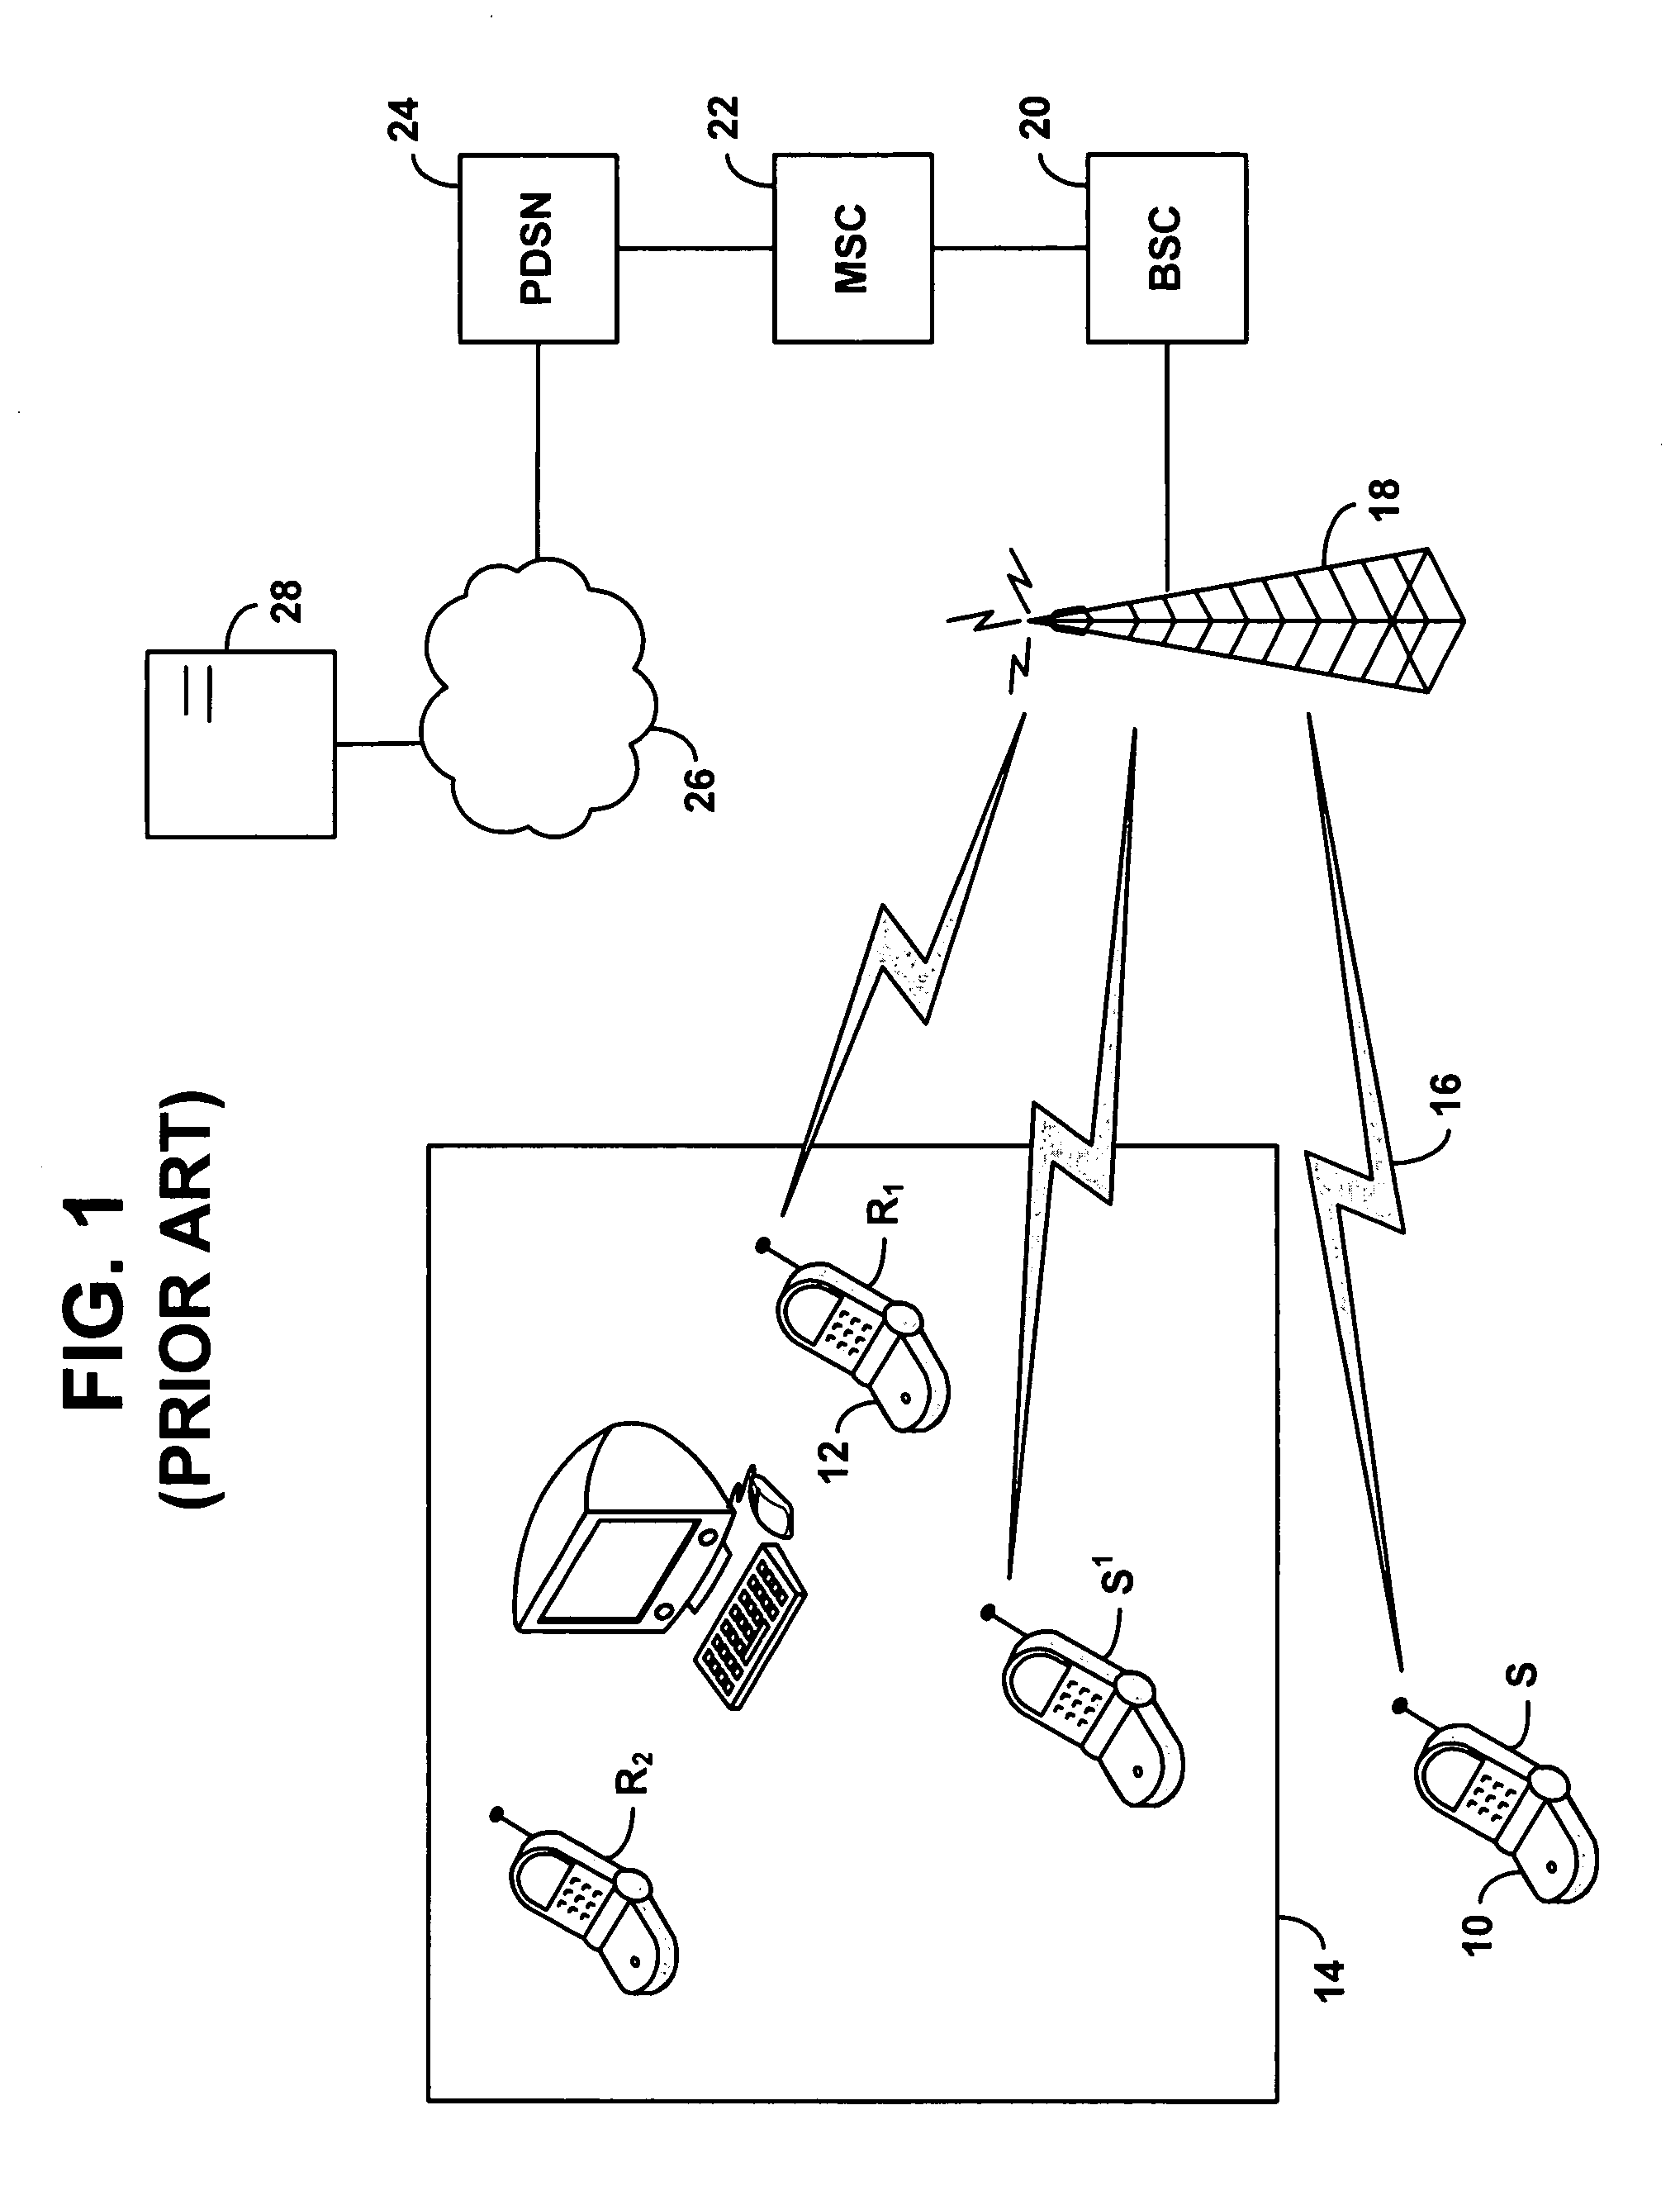 Multimodal wireless communication device with user selection of transceiver mode via dialing string